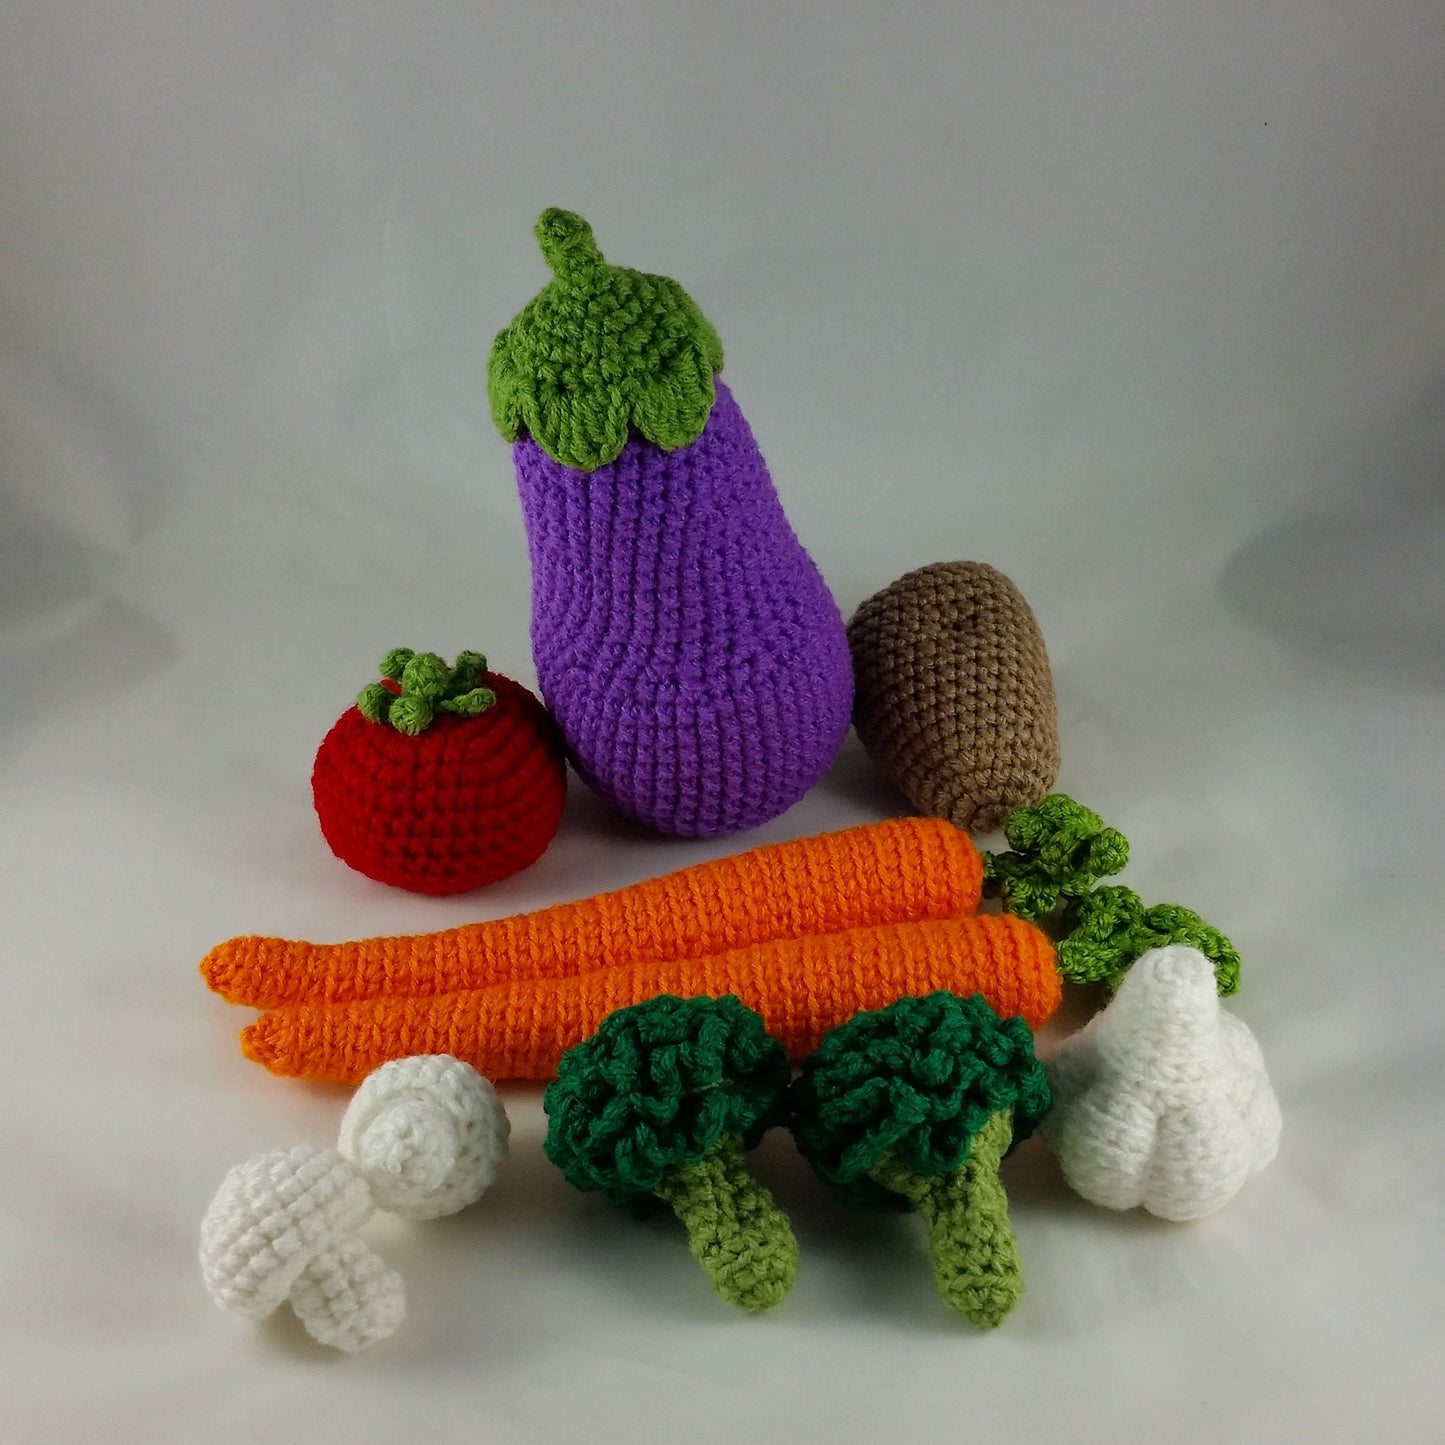 Eggplant Crochet Pattern+ Coloring Page